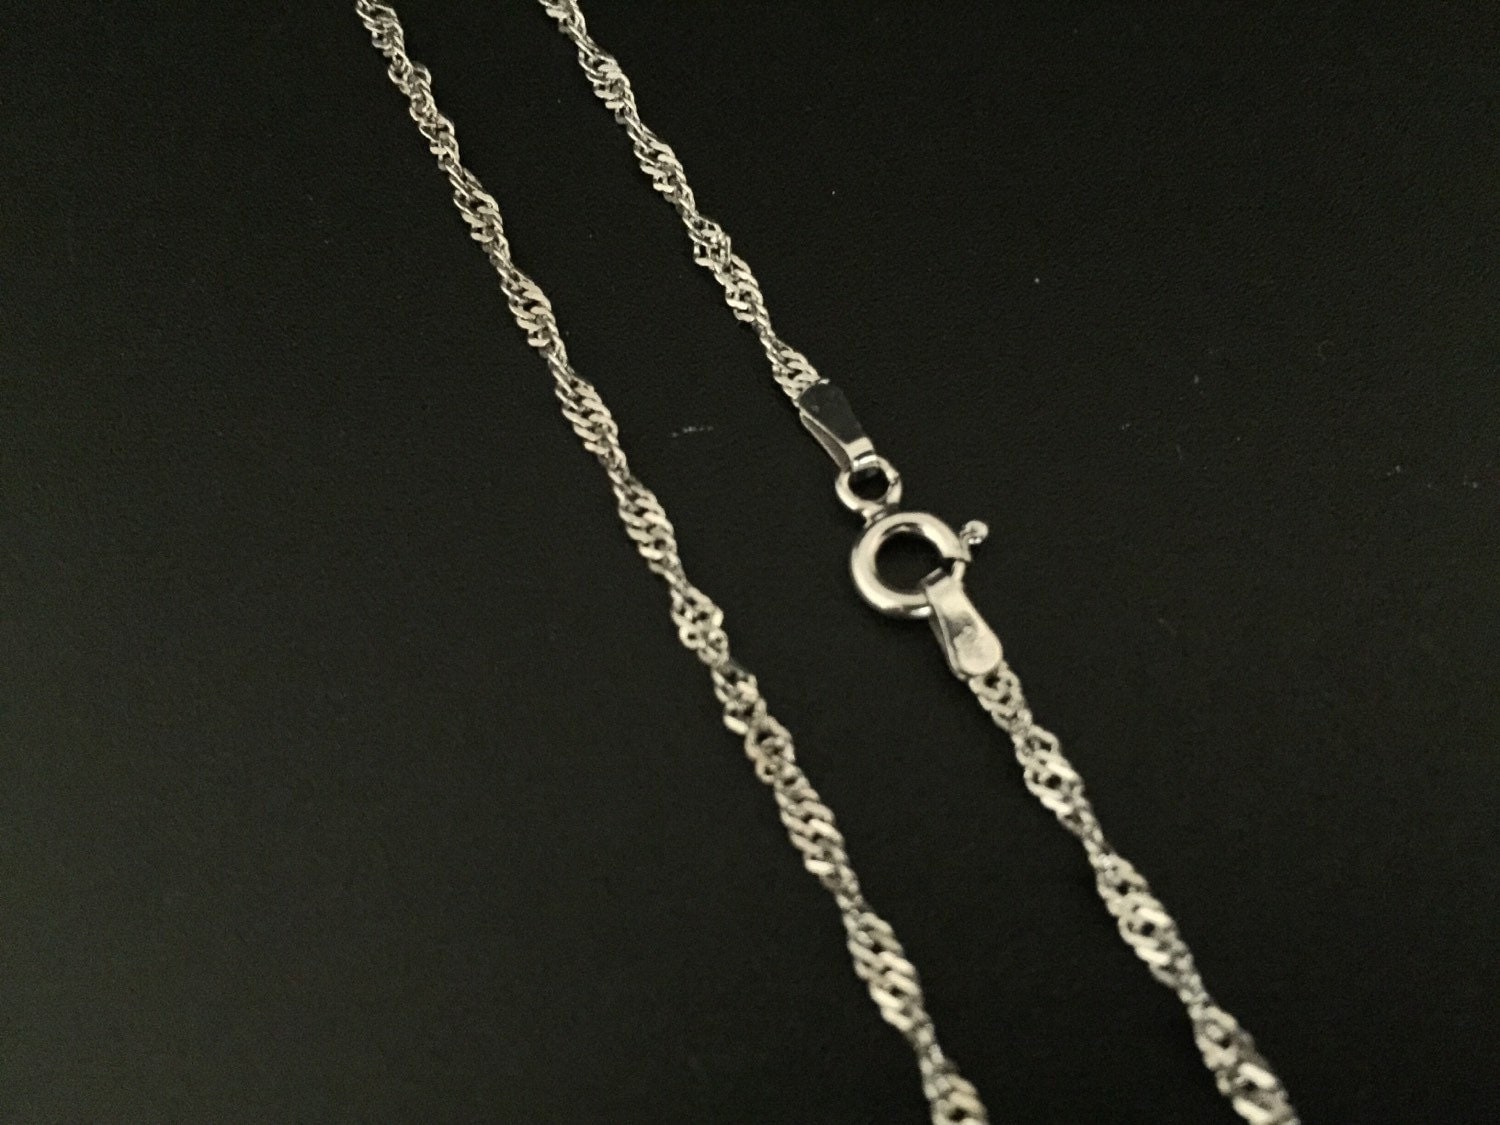 Silver Singapore Chain // 925 Sterling Silver // 1.8mm Gage